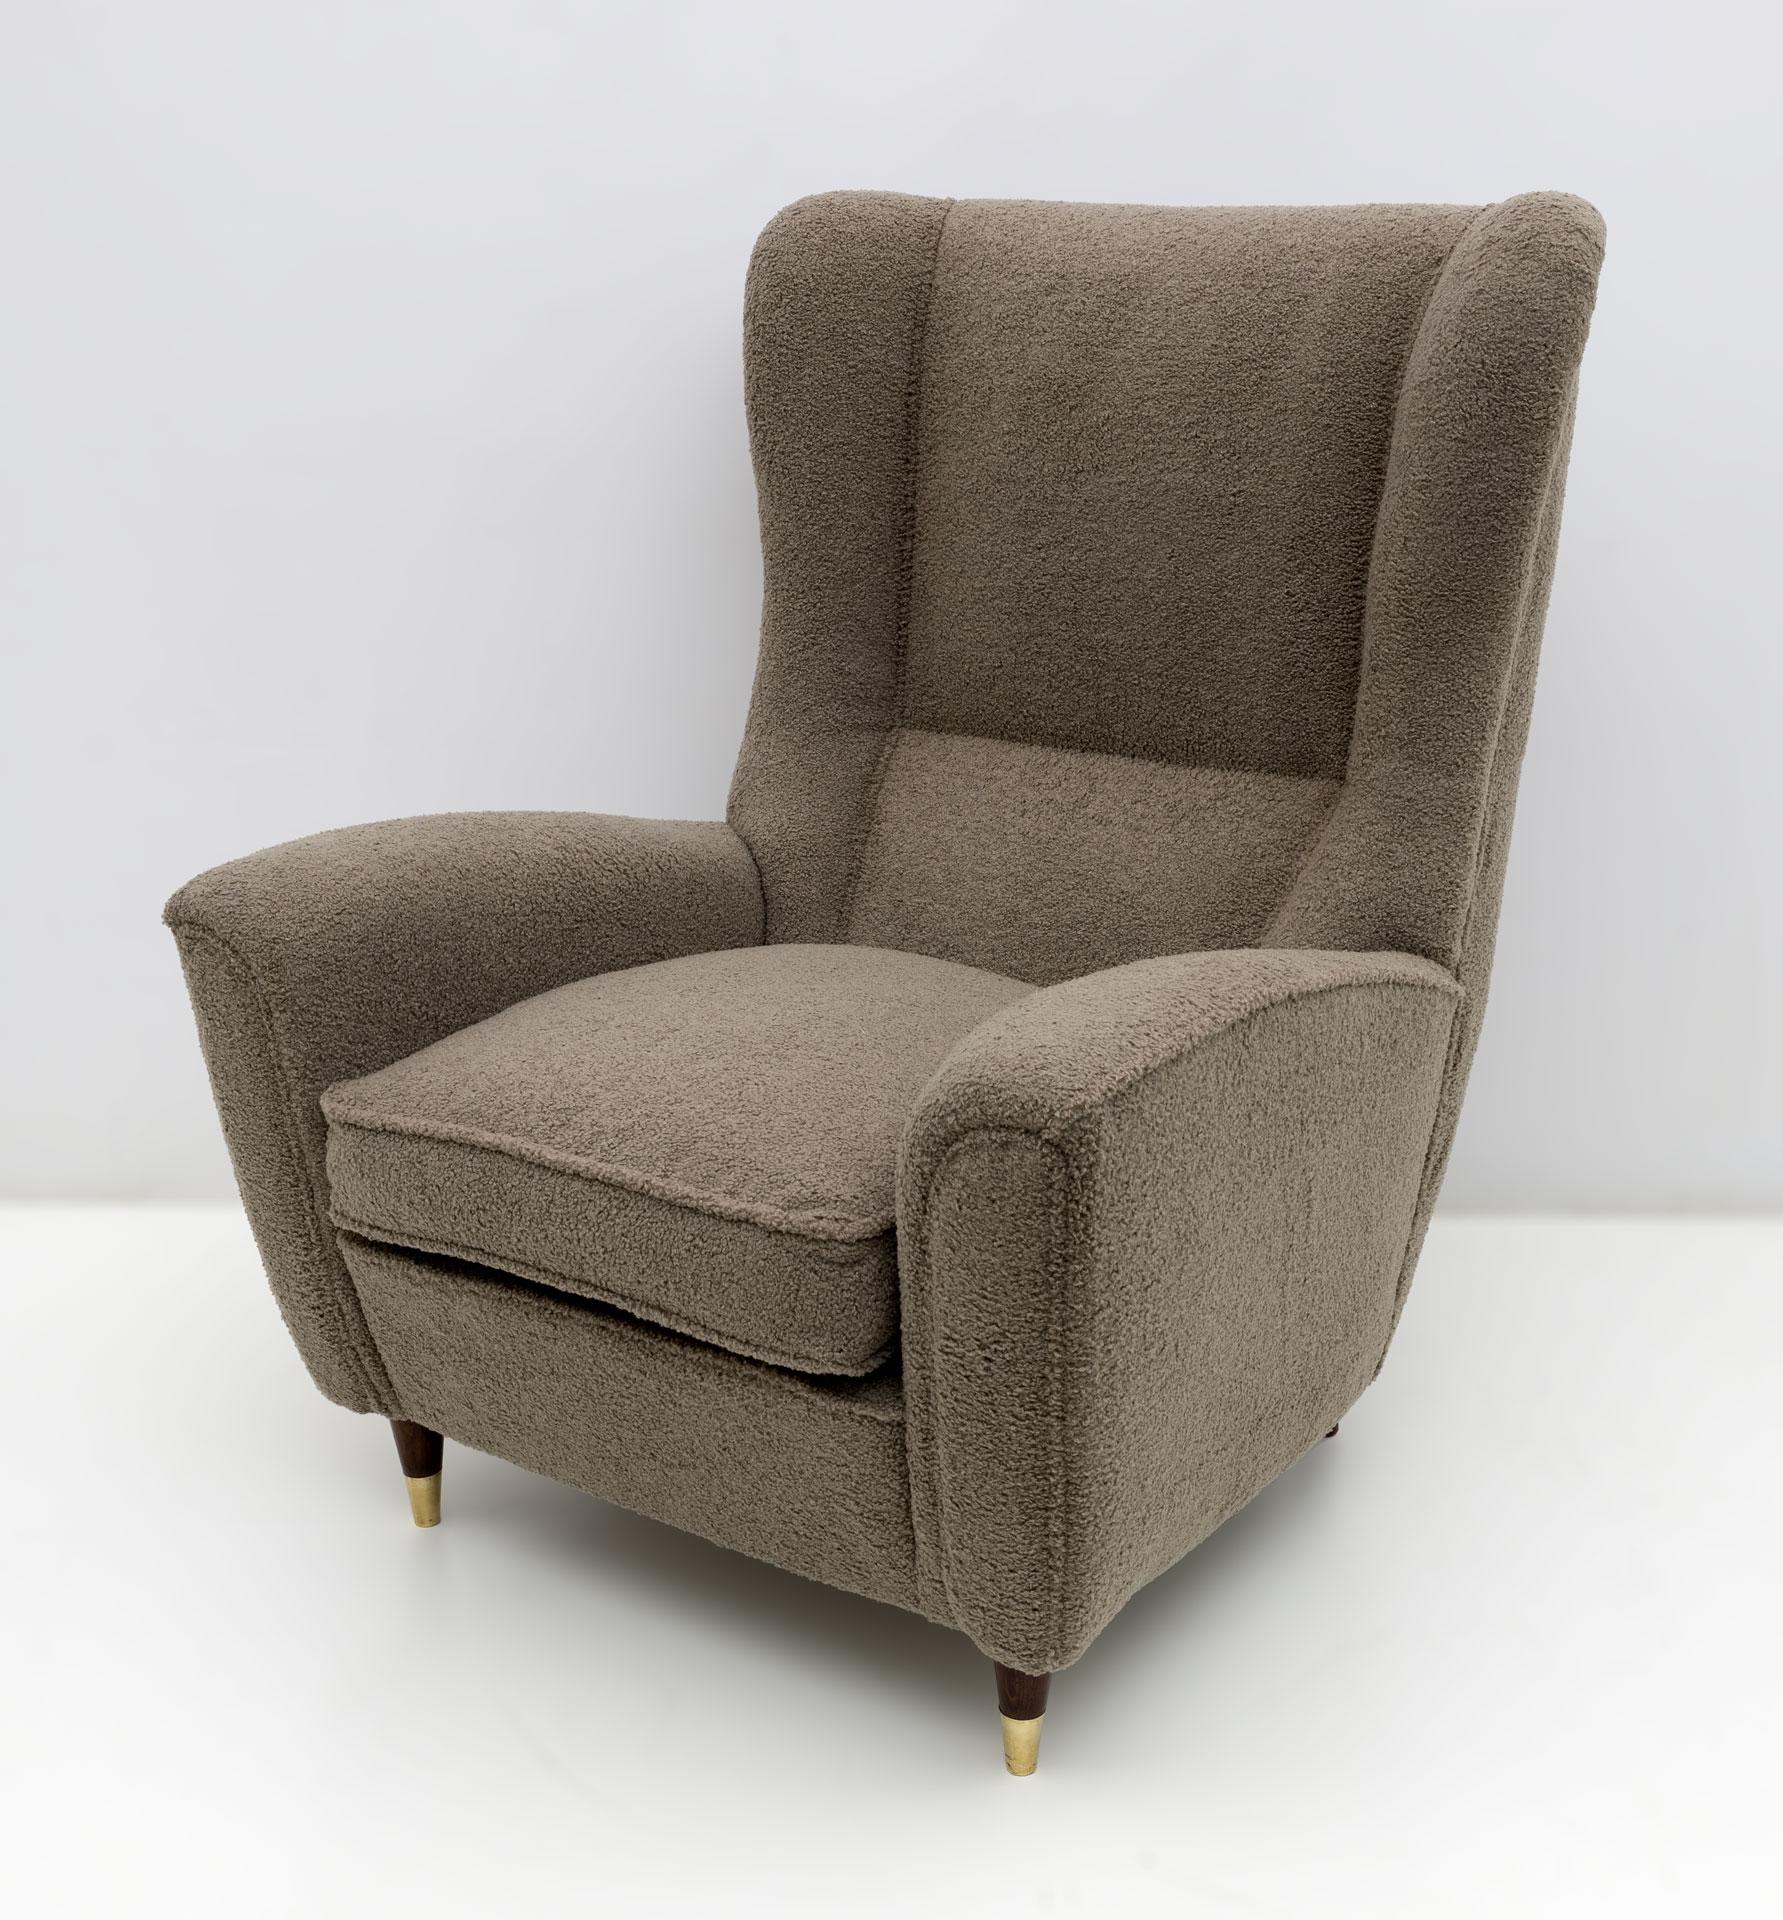 This armchair in the style of Gio Ponti was produced by the famous Italian company Isa from Bergamo, where Gio Ponti collaborated for several years. High back, very imposing and comfortable, upholstered in fine bouclé, this lounge chair is perfect